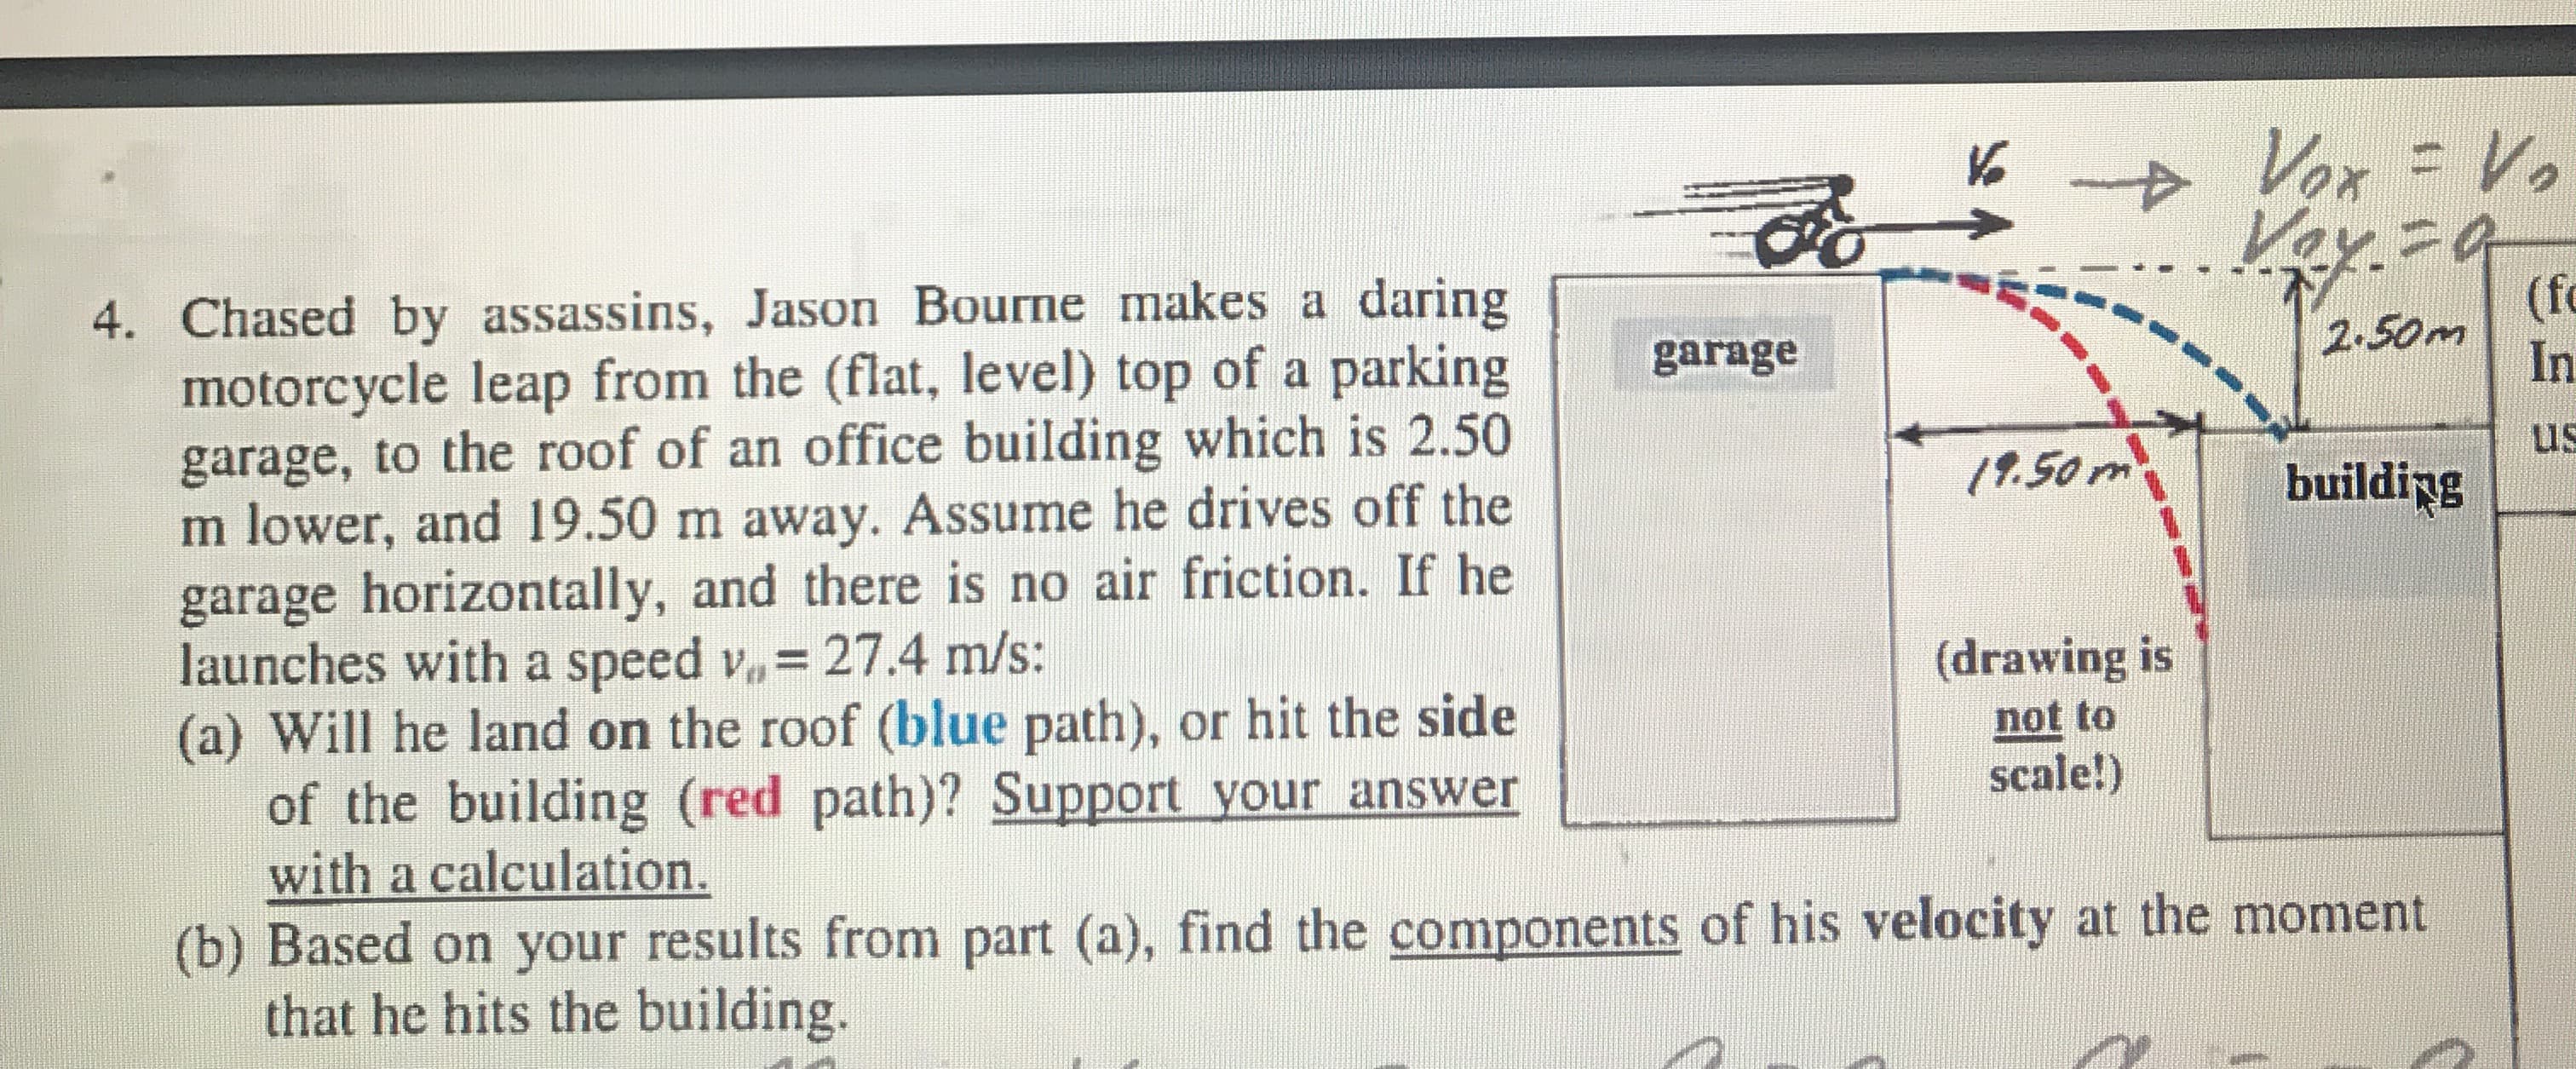 Vox = Vo
Vay =a
4. Chased by assassins, Jason Bourne makes a daring
motorcycle leap from the (flat, level) top of a parking
garage, to the roof of an office building which is 2.50
m lower, and 19.50 m away. Assume he drives off the
garage horizontally, and there is no air friction. If he
launches with a speed v= 27.4 m/s:
(a) Will he land on the roof (blue path), or hit the side
of the building (red path)? Support your answer
with a calculation.
(b) Based on your results from part (a), find the components of his velocity at the moment
that he hits the building.
(fc
2.50m
In
b.29
garage
us
19.50m
buildigg
(drawing is
not to
scale!)
